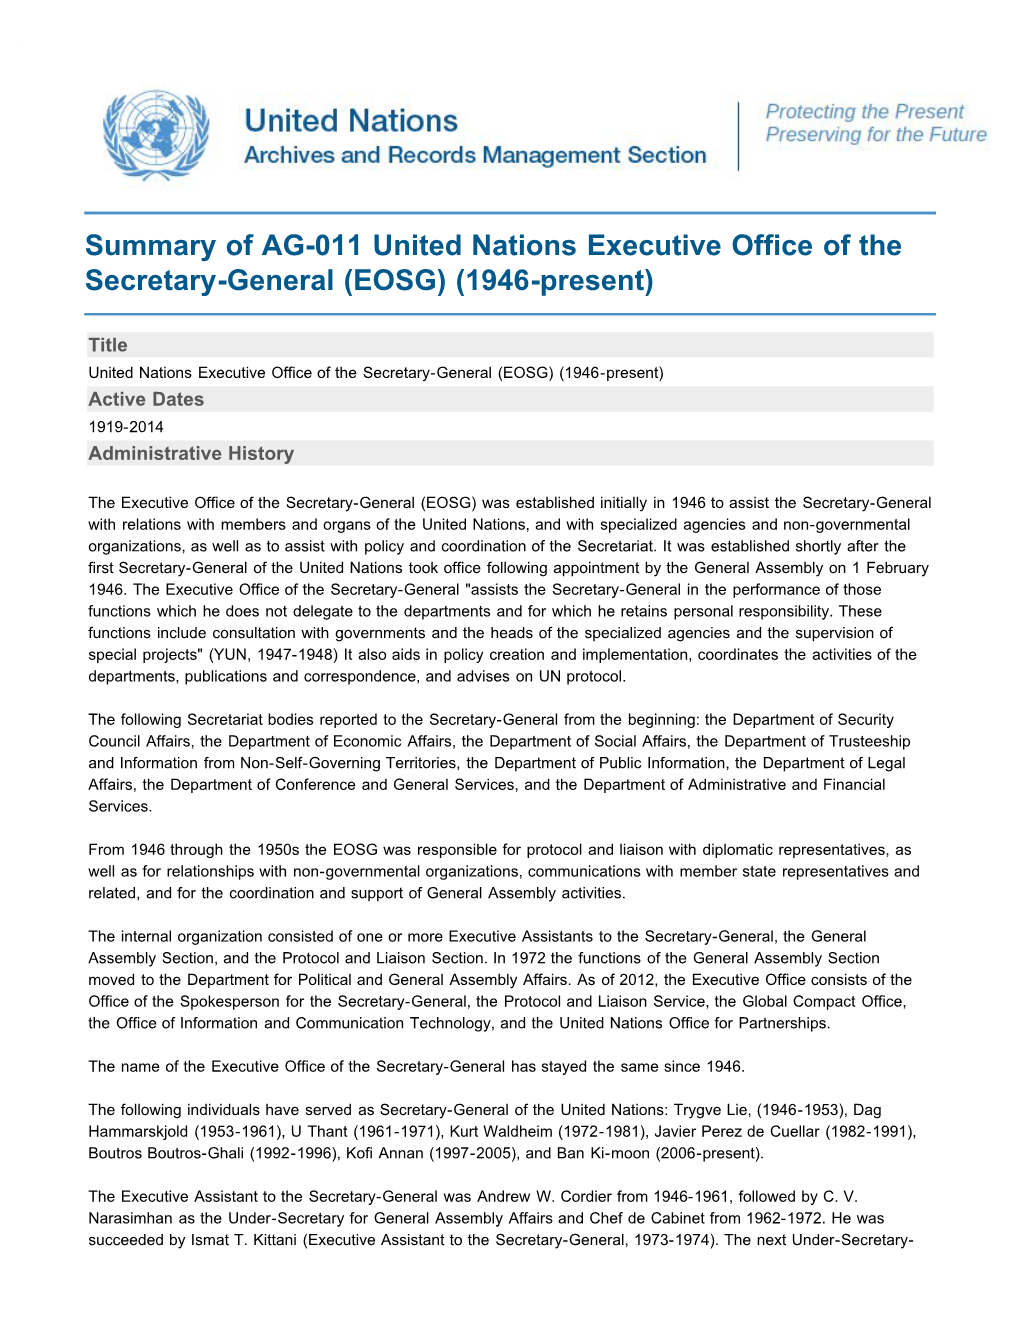 Summary of AG-011 United Nations Executive Office of the Secretary-General (EOSG) (1946-Present)